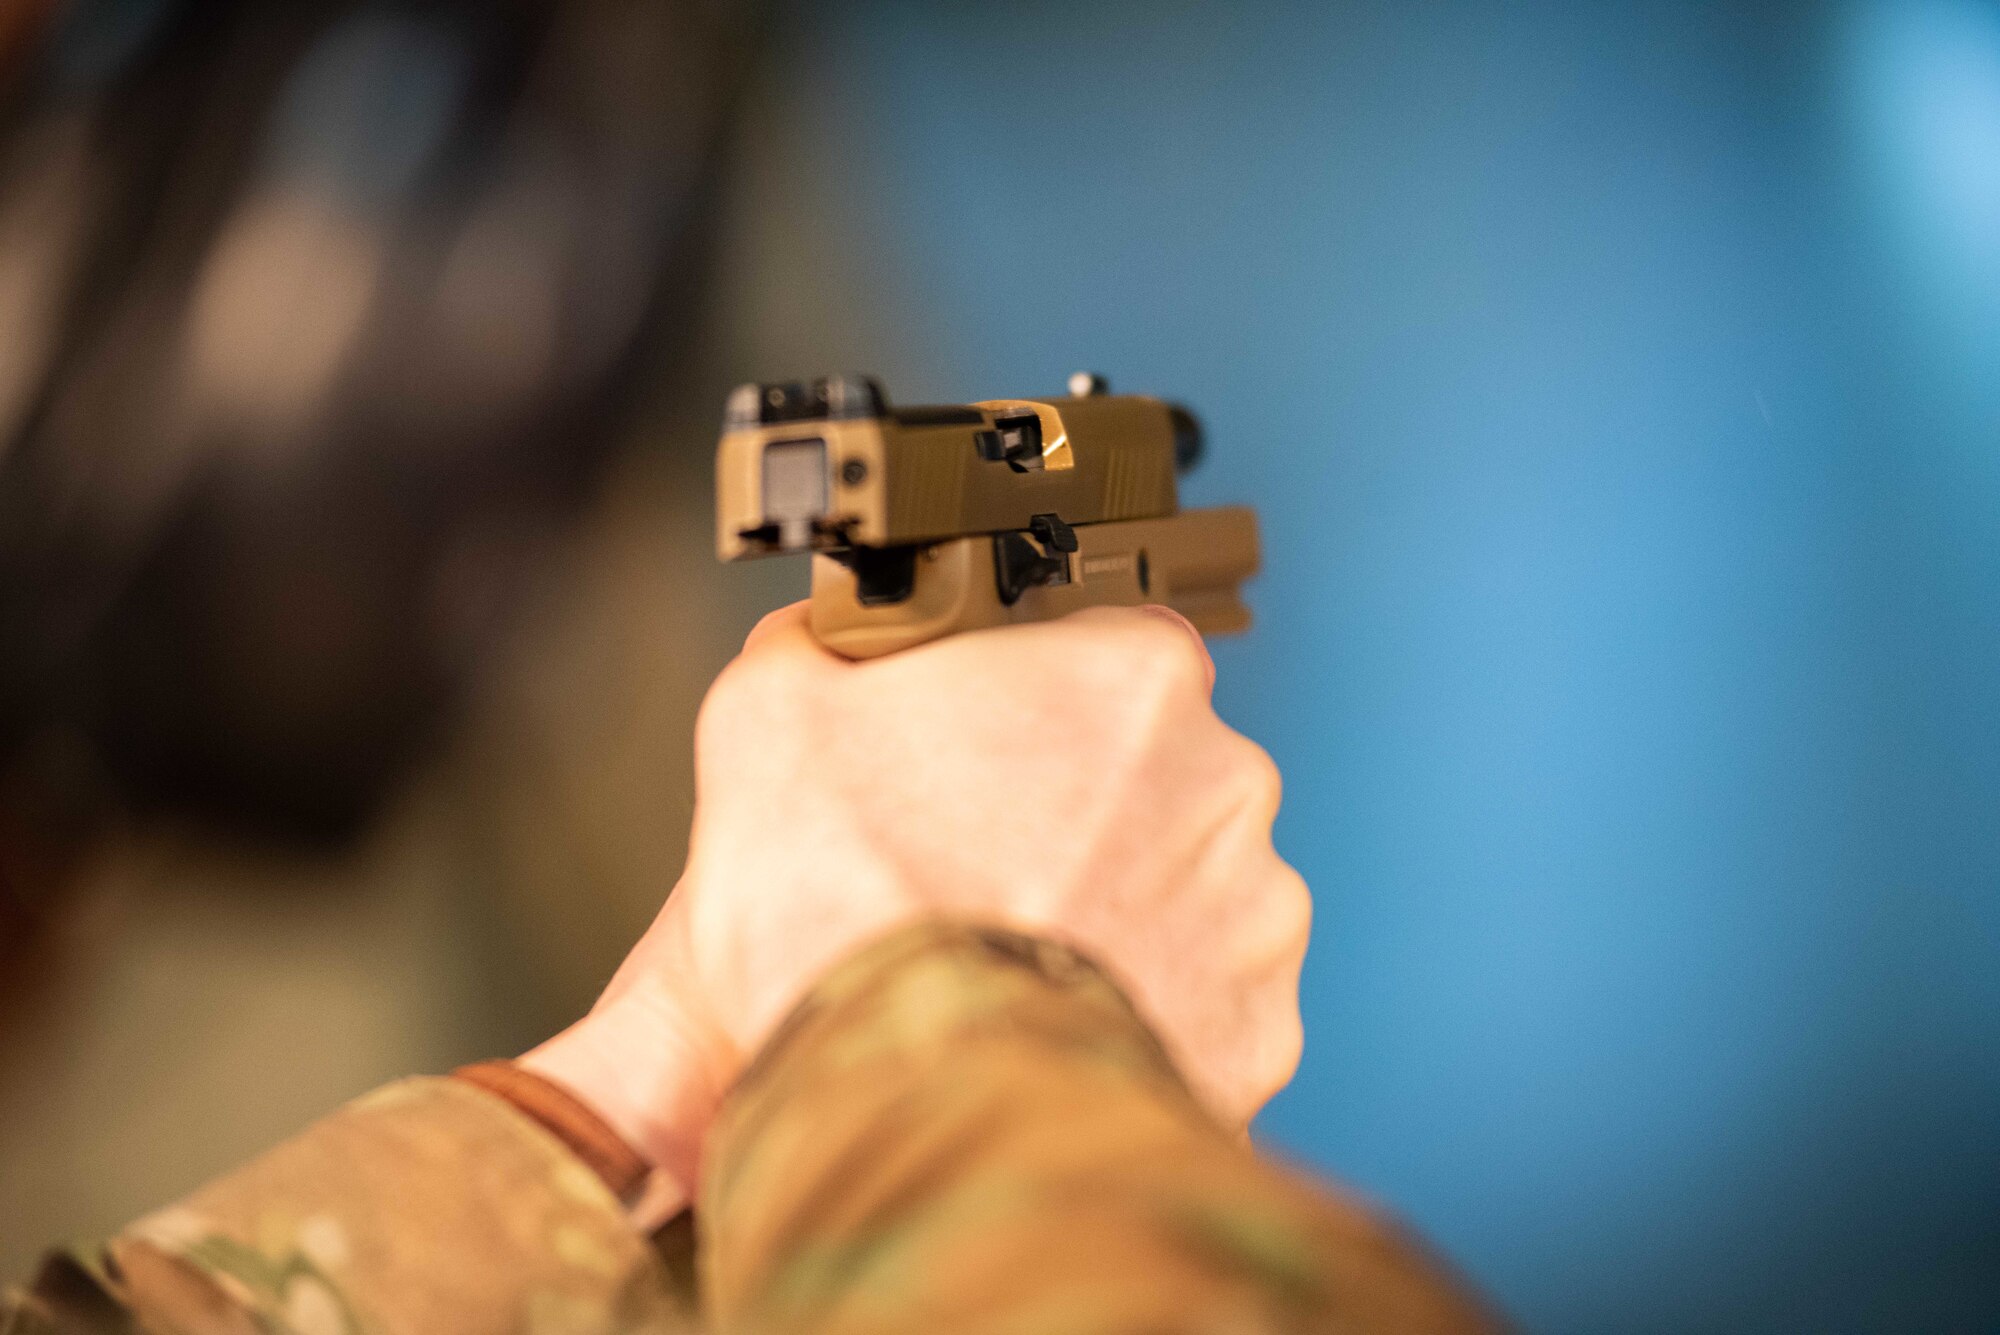 An M18 pistol’s slide locks to the rear after the last round of the magazine is fired Jan. 10, 2019, at McConnell Air Force Base, Kansas. The sidearm features interchangeable grips to best fit the user’s hand. (U.S. Air Force photo by Staff Sgt. Chris Thornbury)